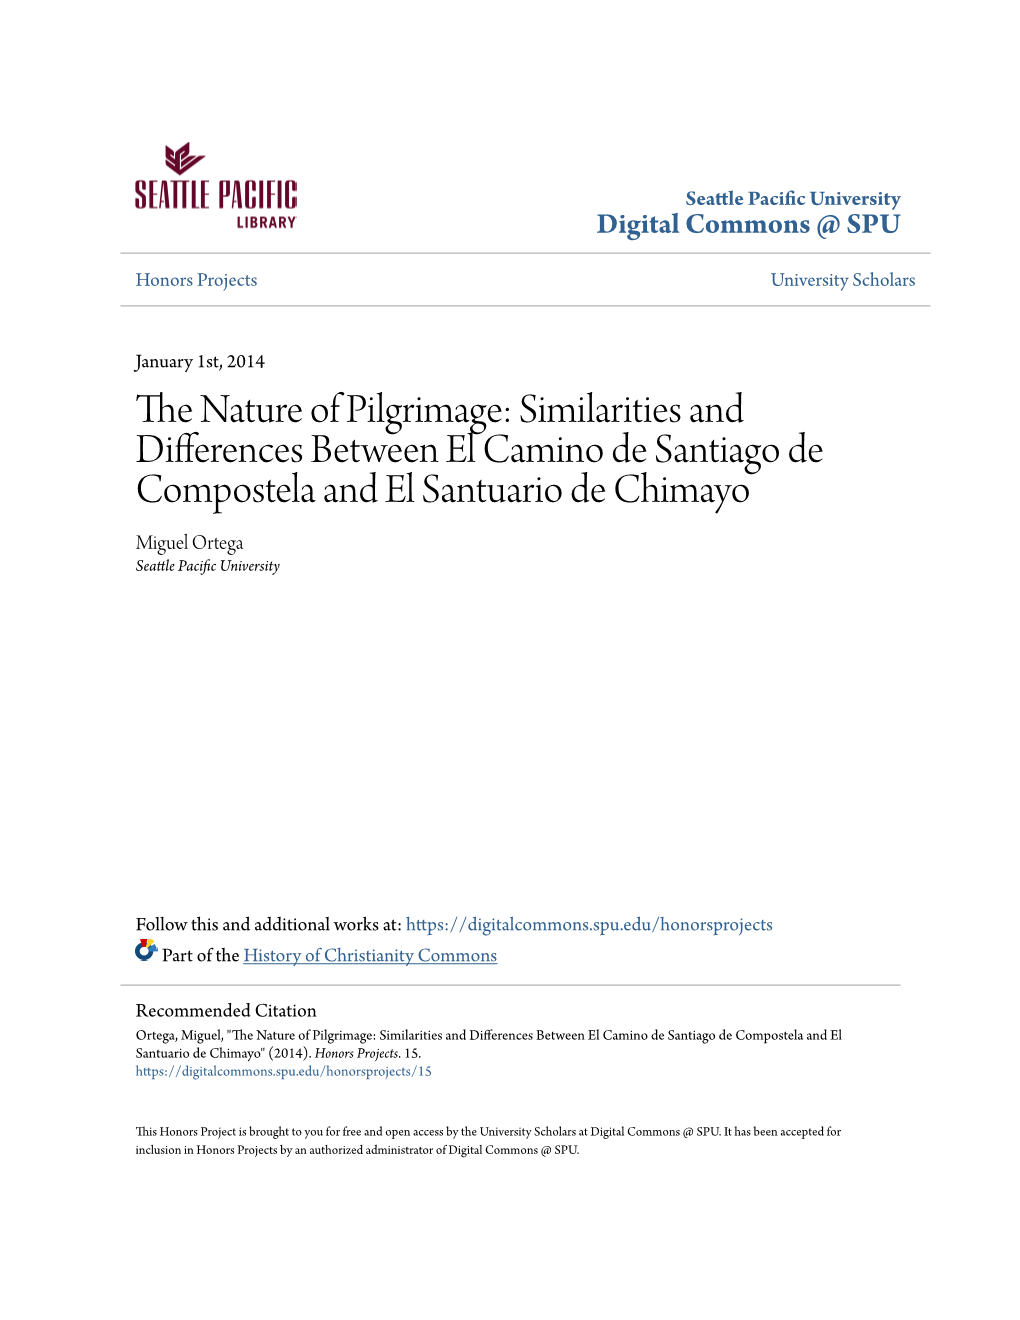 The Nature of Pilgrimage: Similarities and Differences Between El